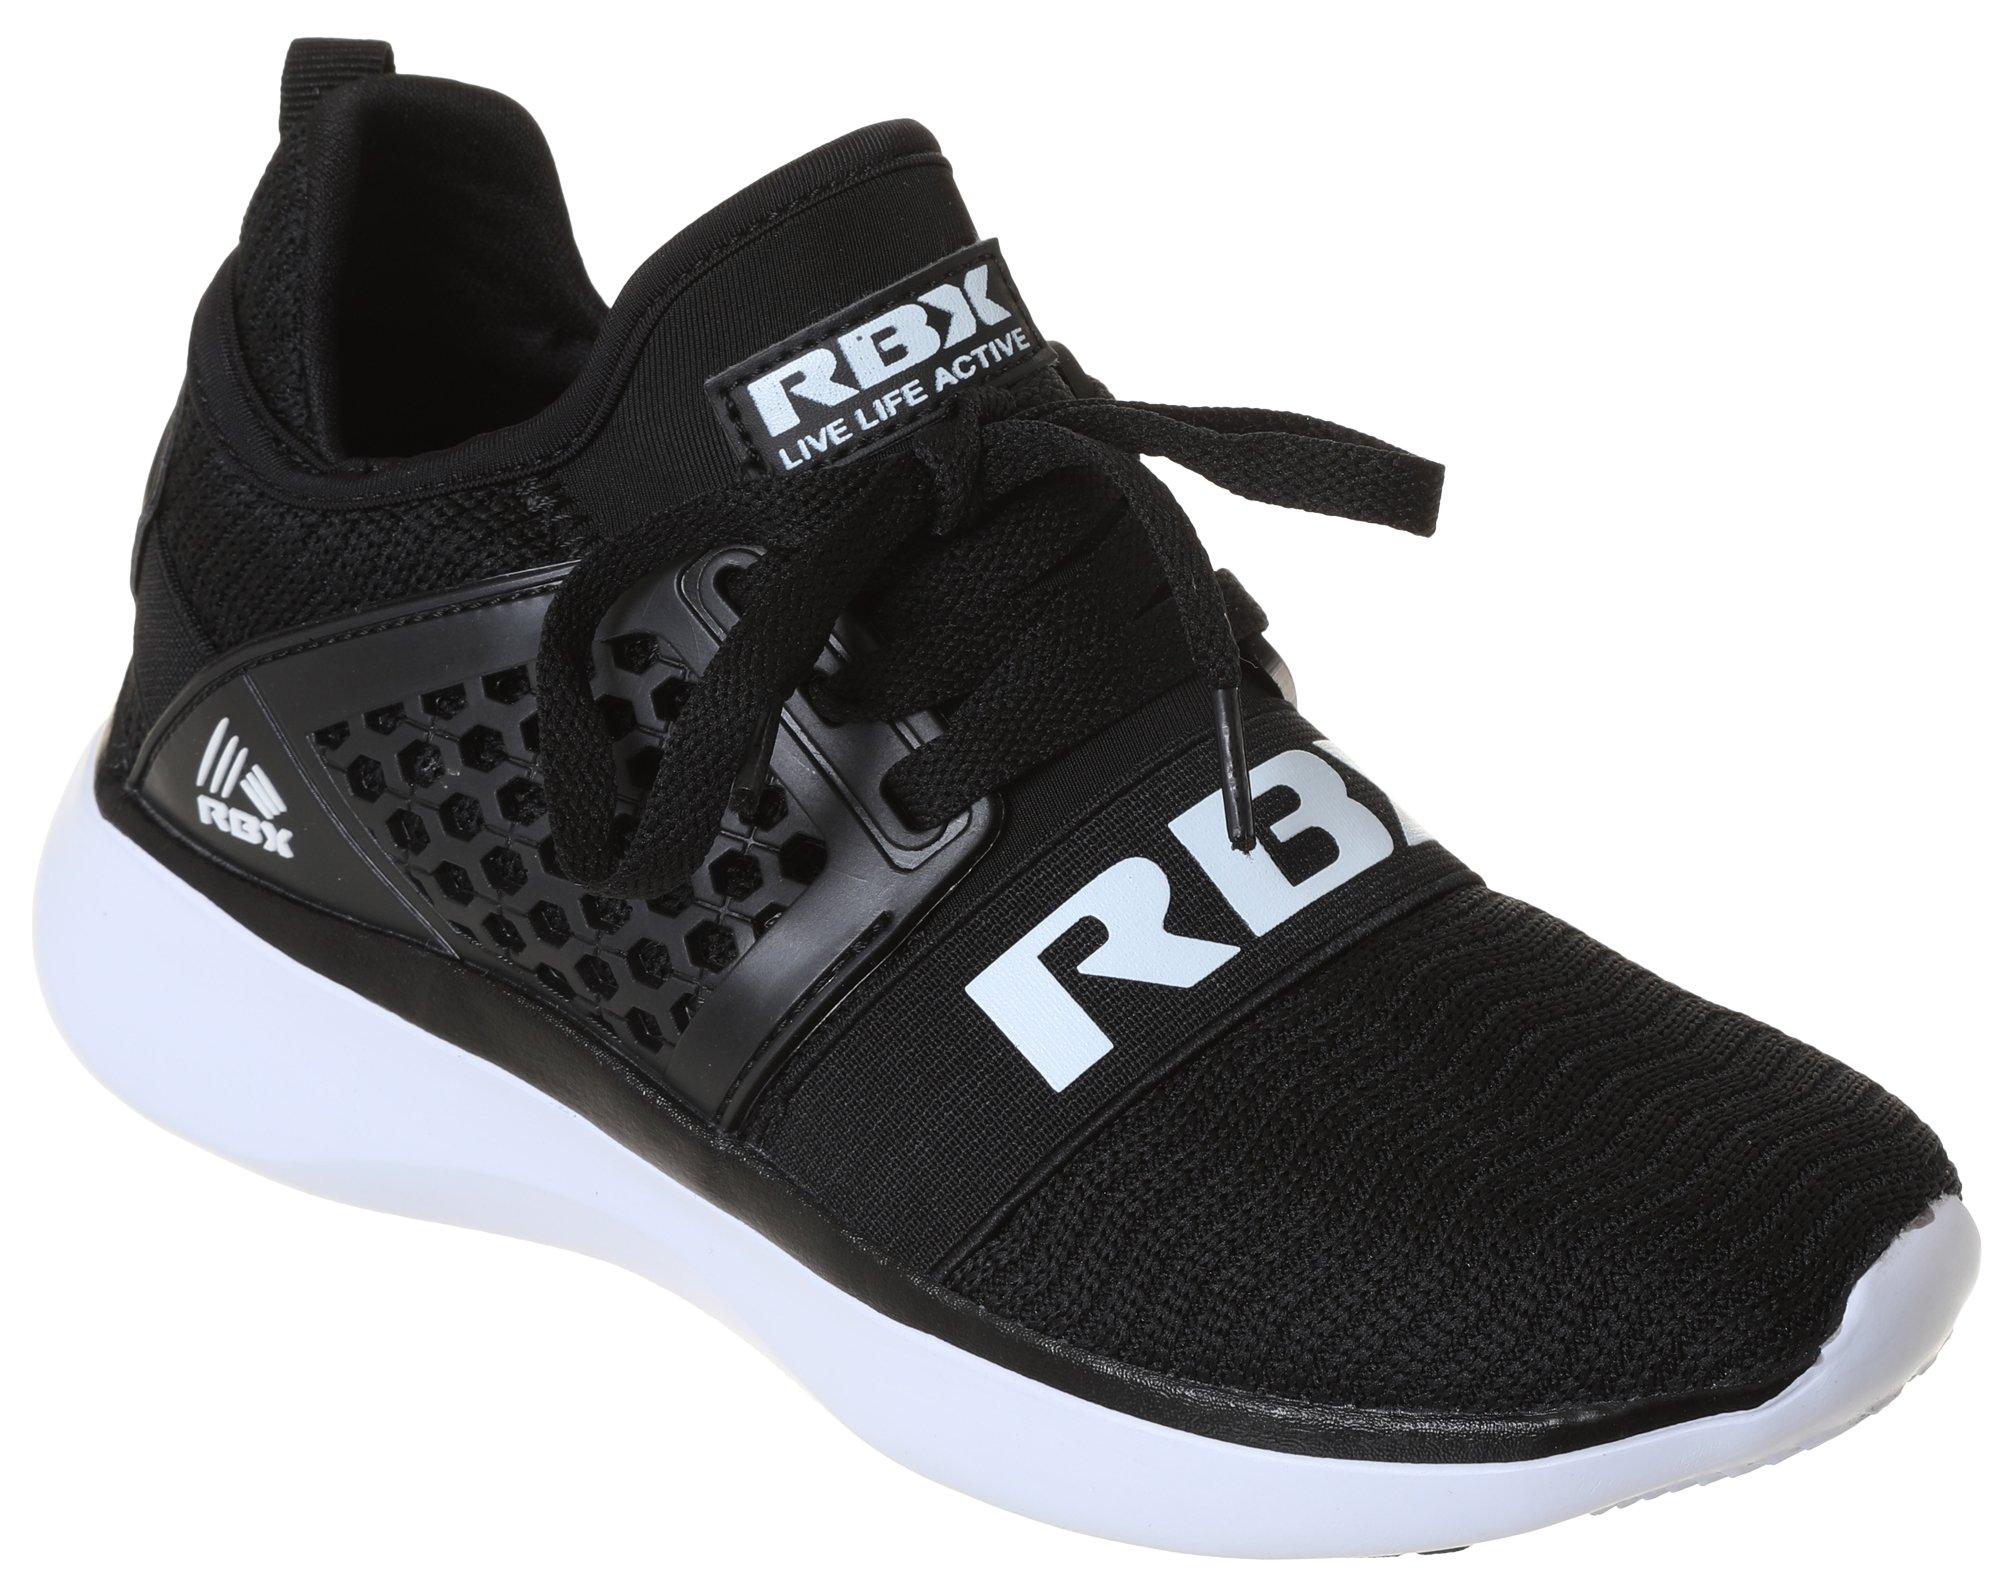 Women's Band Logo Knit Athletic Sneakers - Black